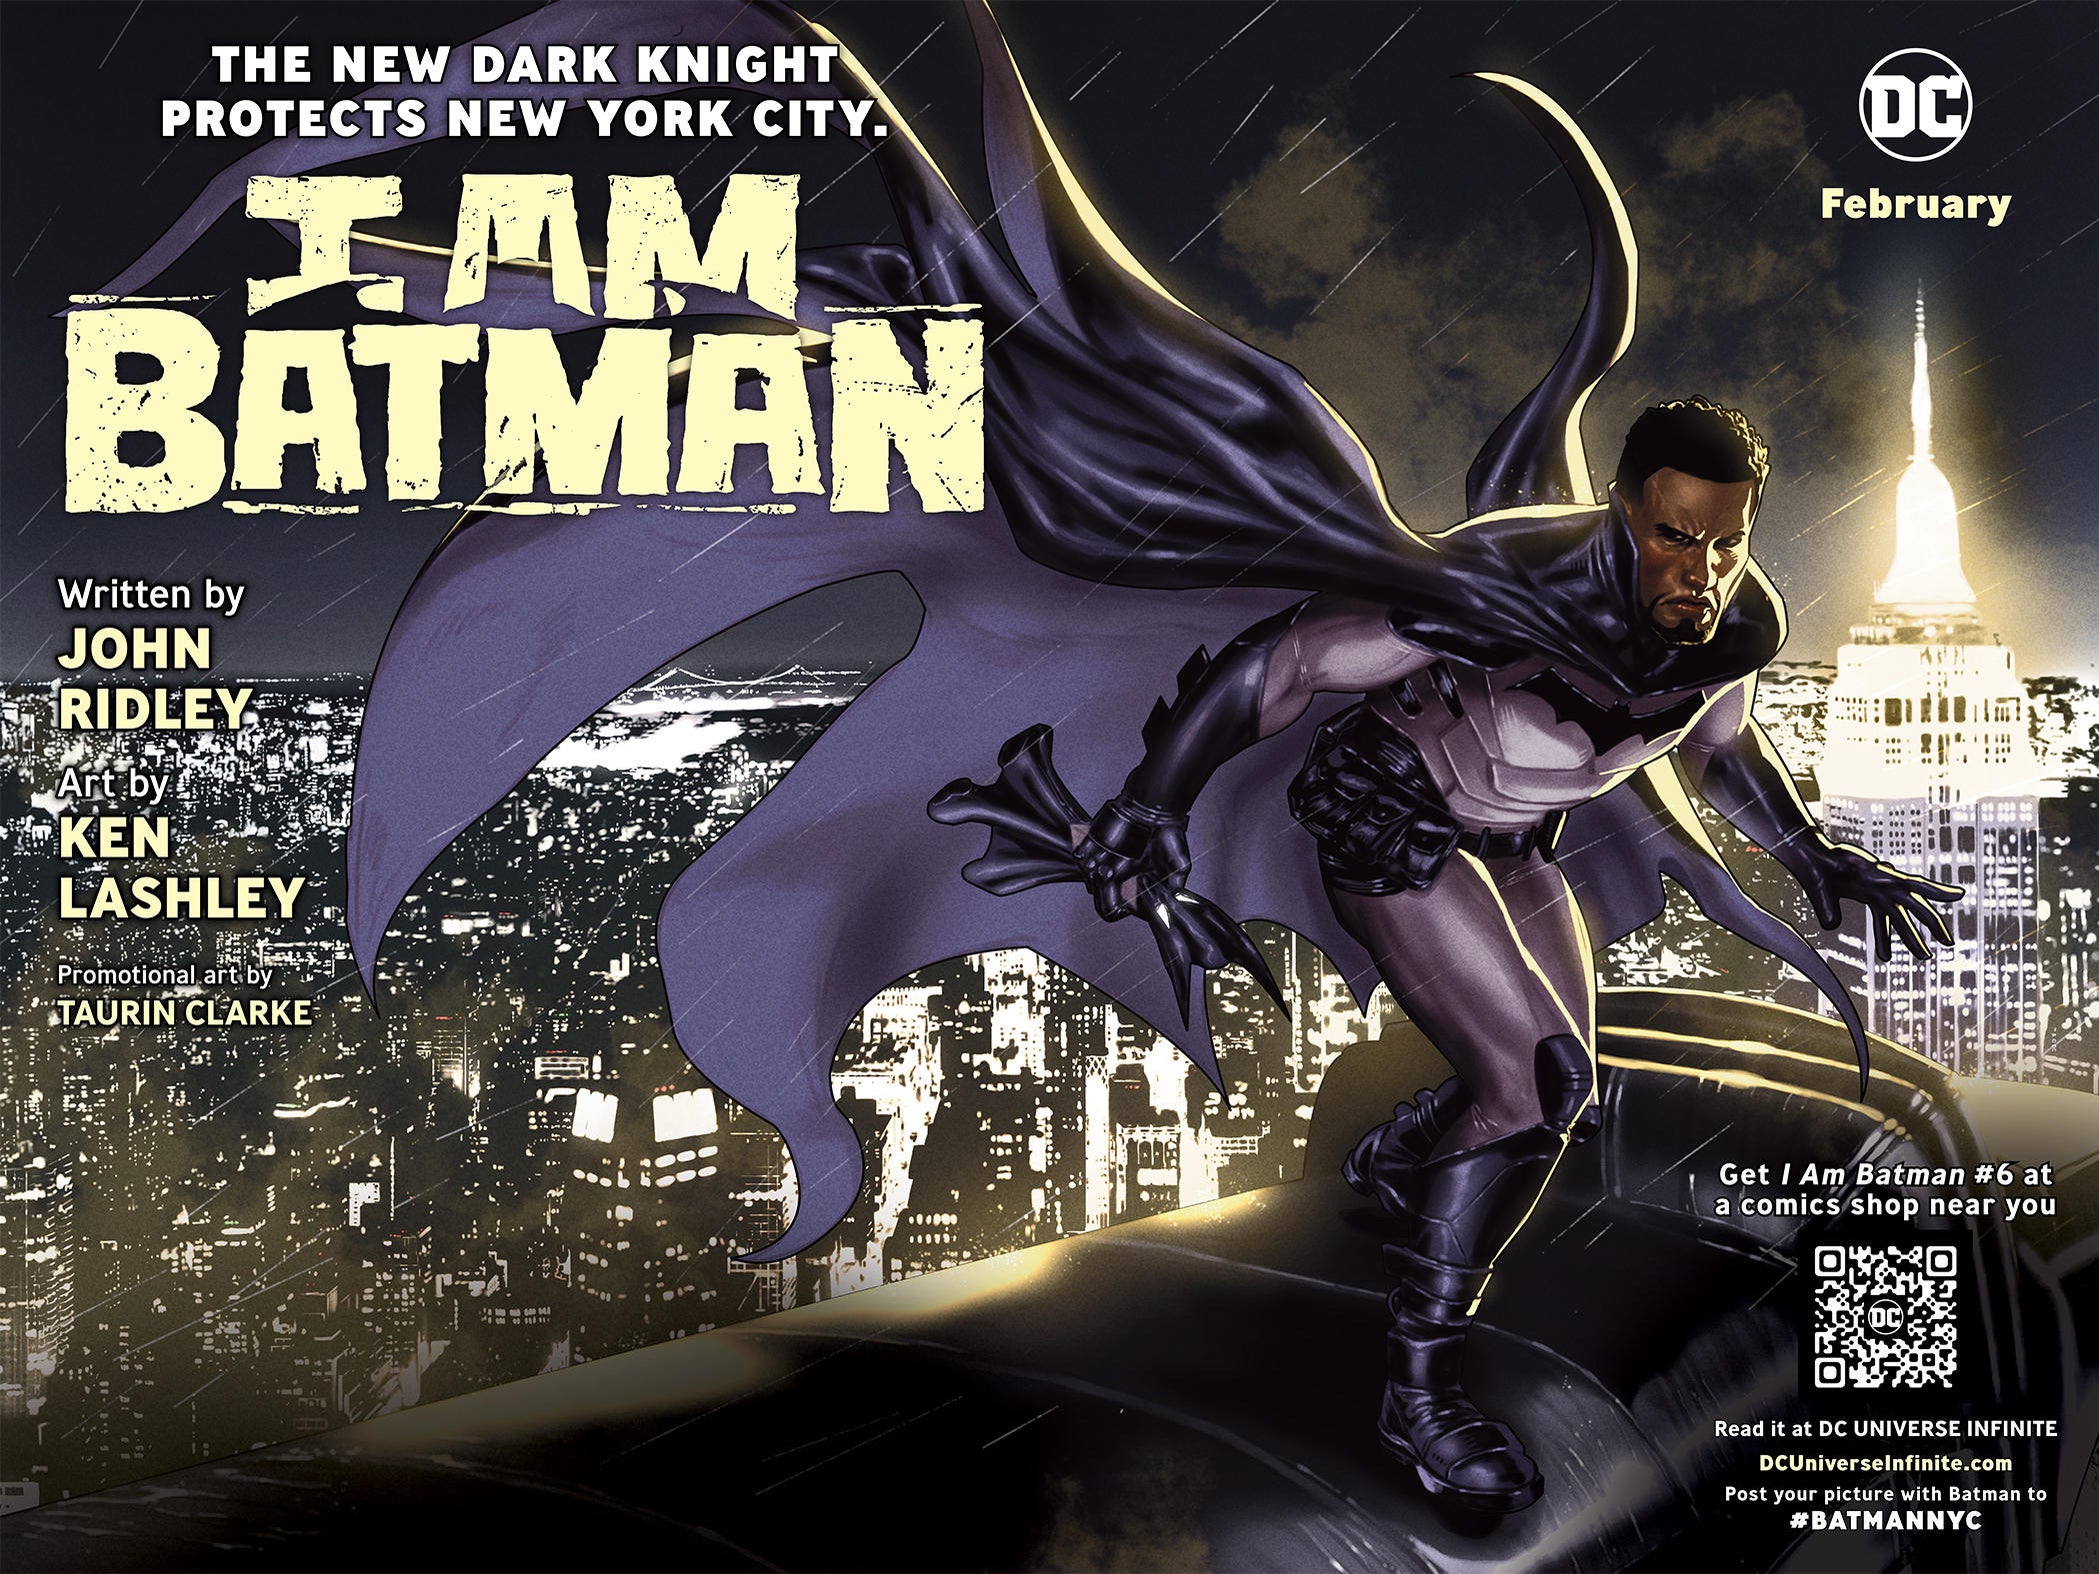 DC's I Am Batman Series Claims New York With Official Banners